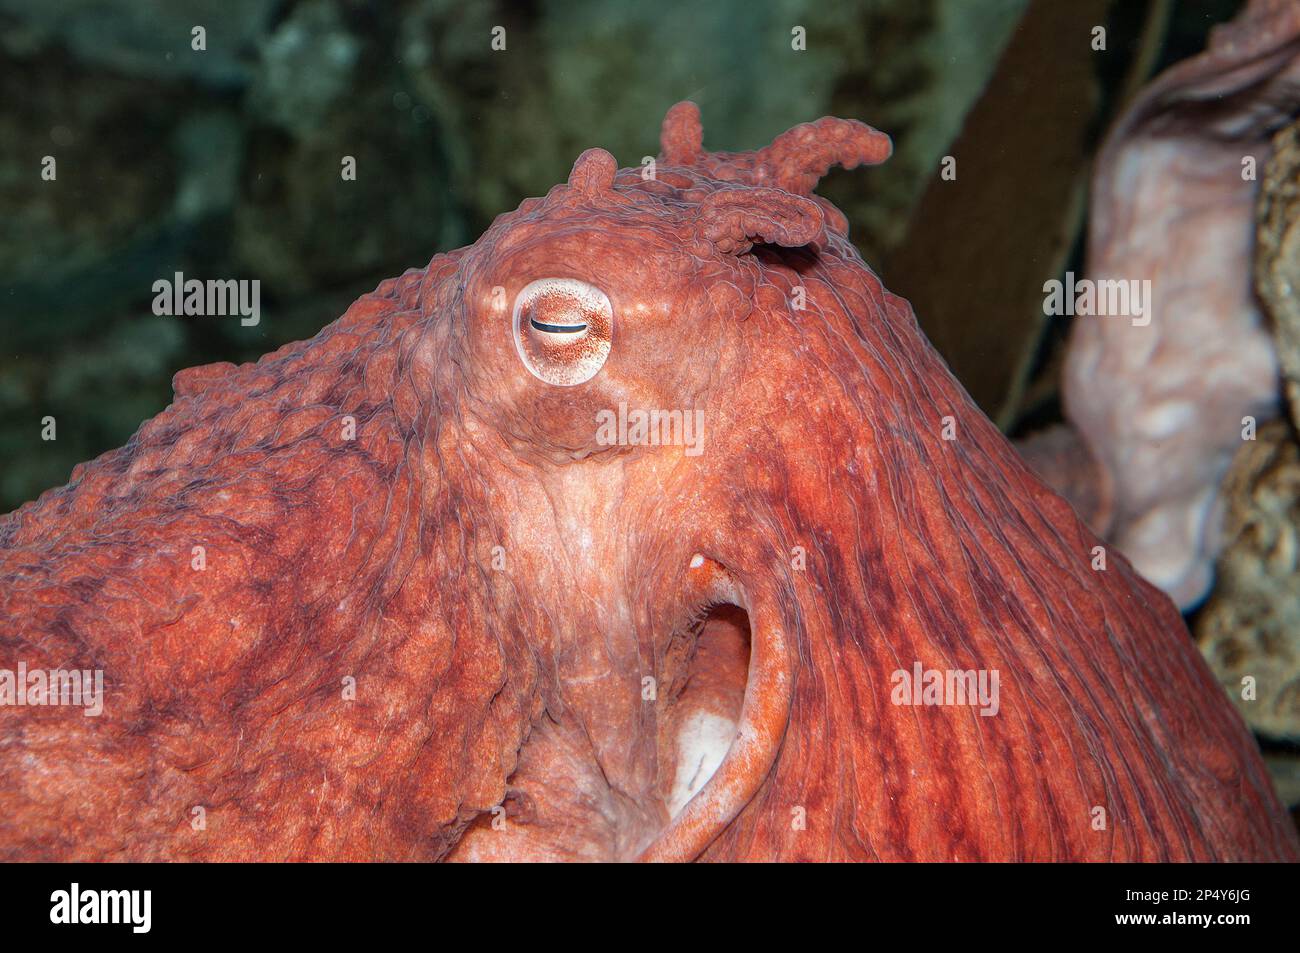 Giant pacific octopus close-up, face Stock Photo